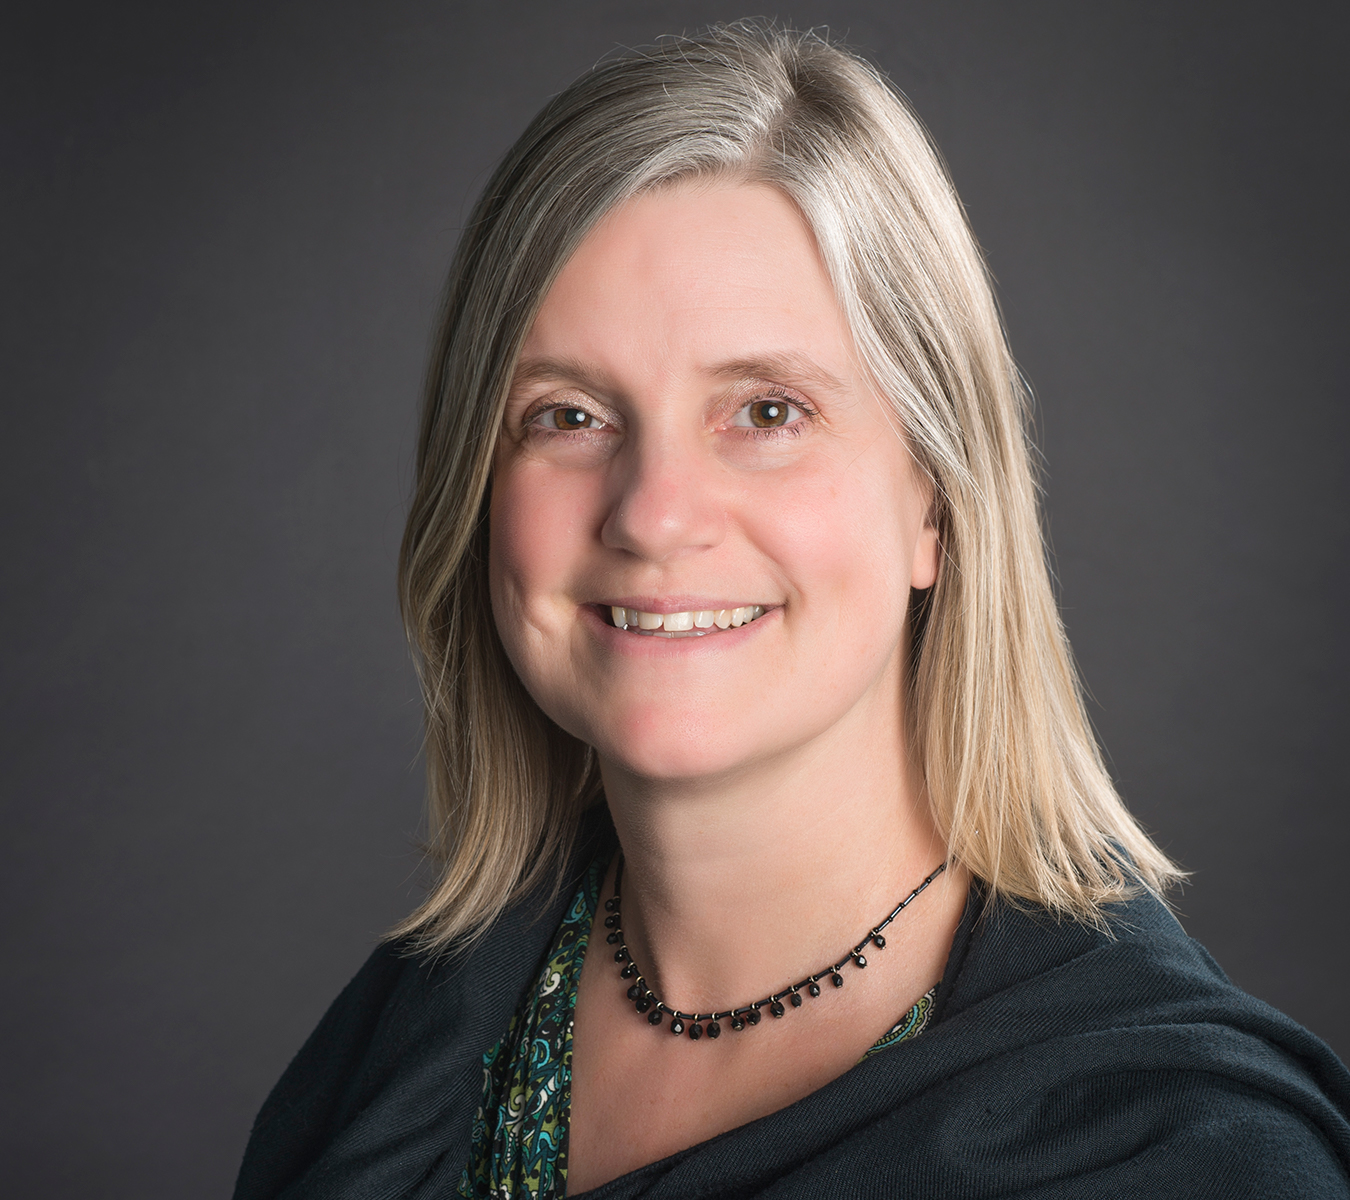 CARE Canada statement: CARE Canada Welcomes Alison Evans as Vice President of Public Engagement